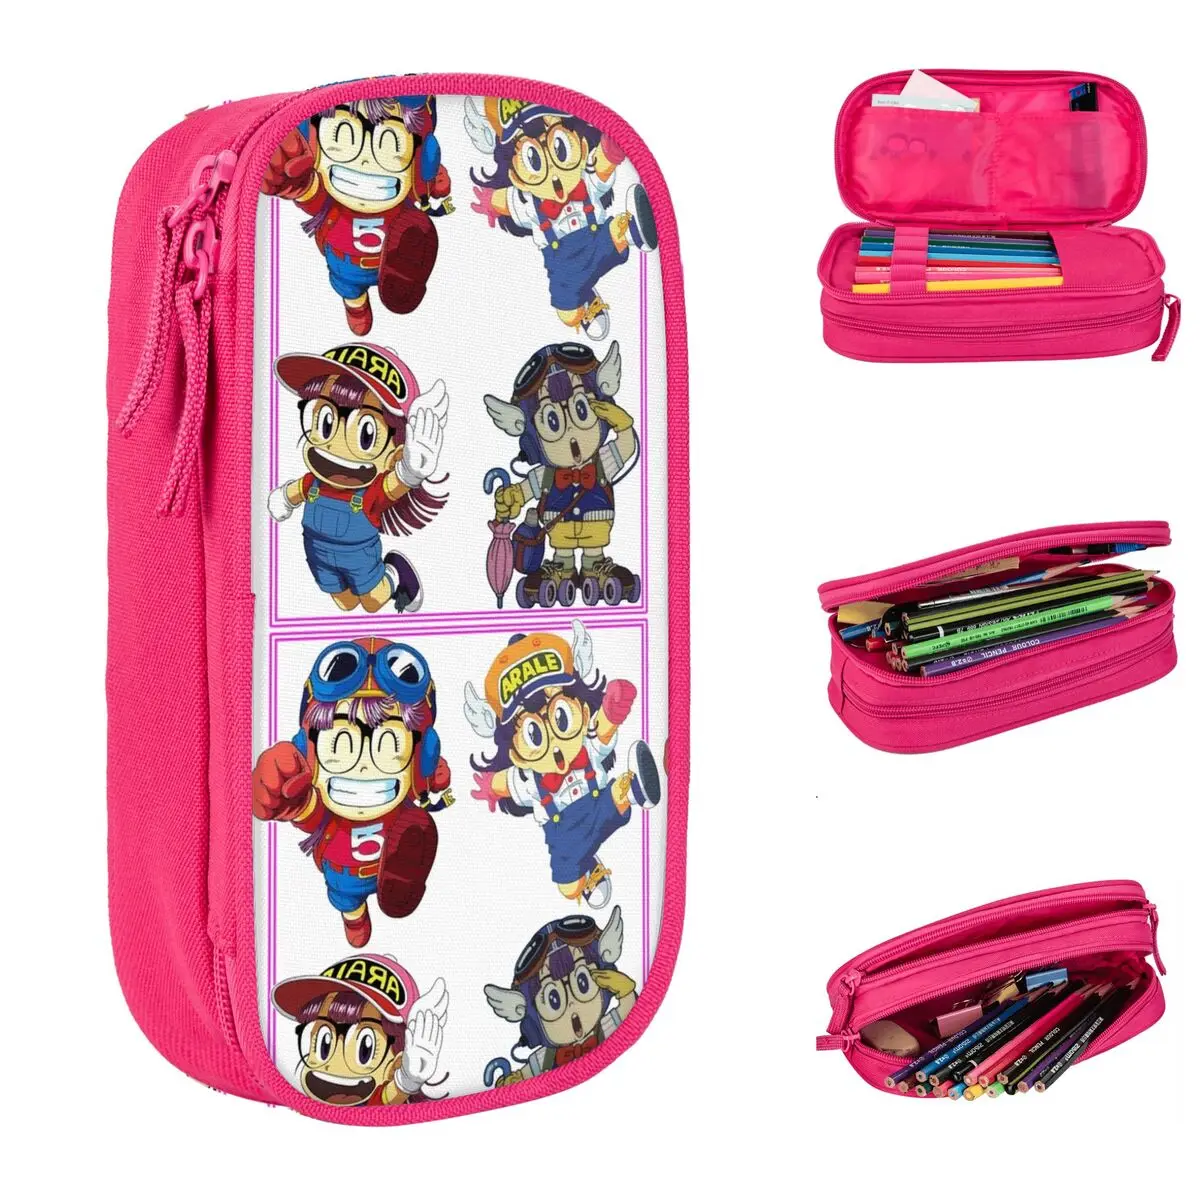 

Classic Arale Norimaki Dr. Slump Pencil Cases Pencilcases Pen Box for Student Large Storage Bags Students School Gift Stationery